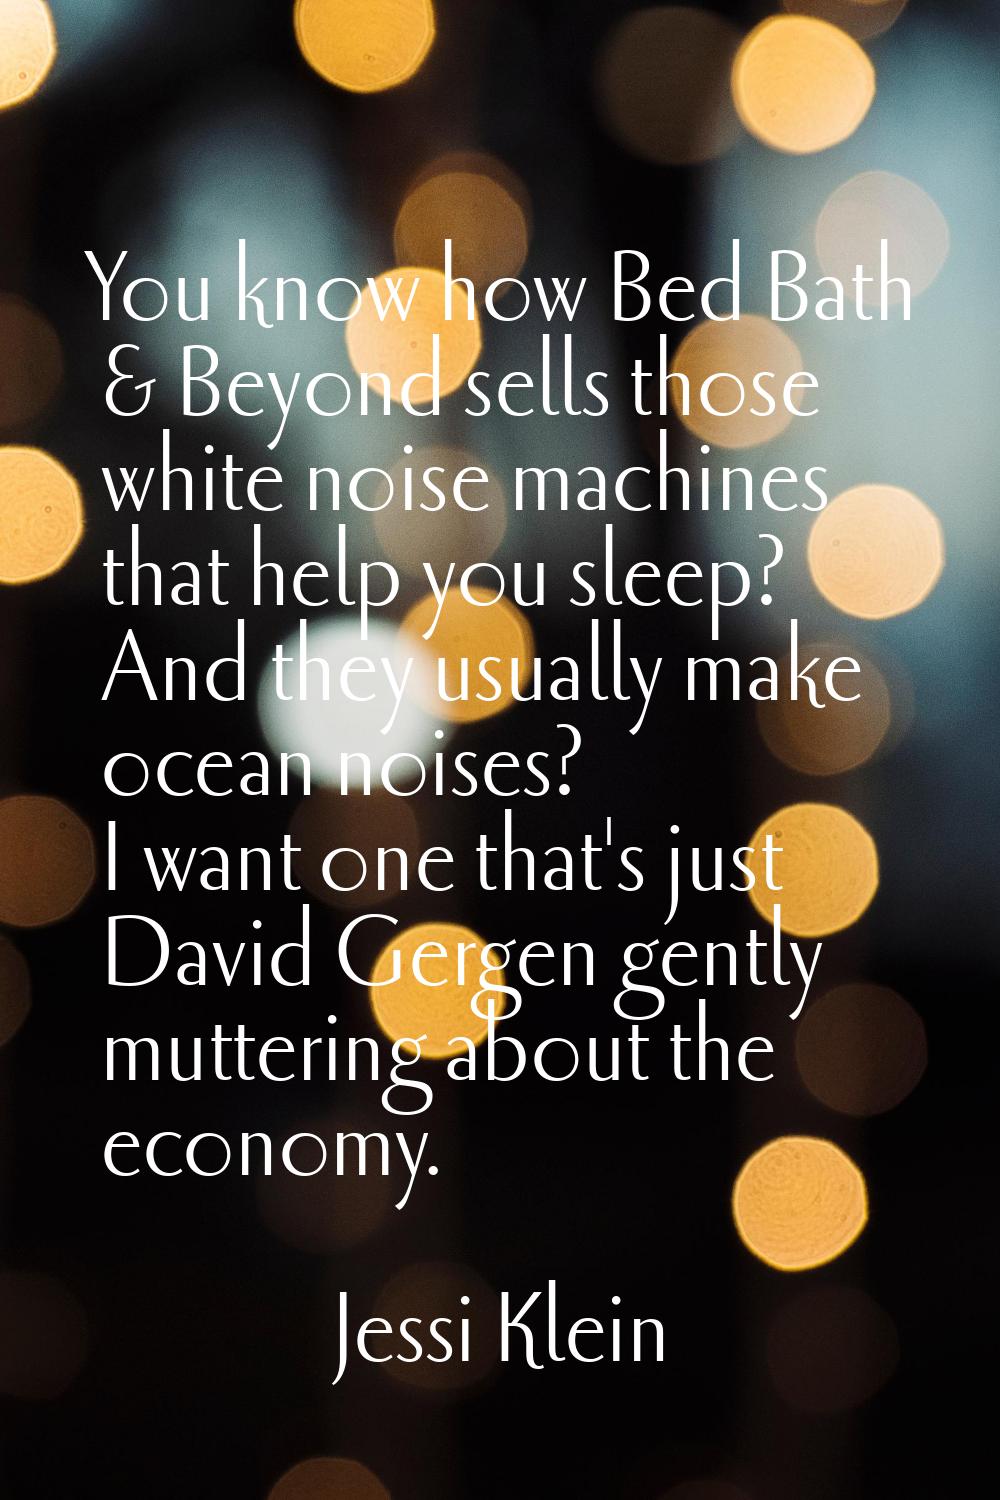 You know how Bed Bath & Beyond sells those white noise machines that help you sleep? And they usual